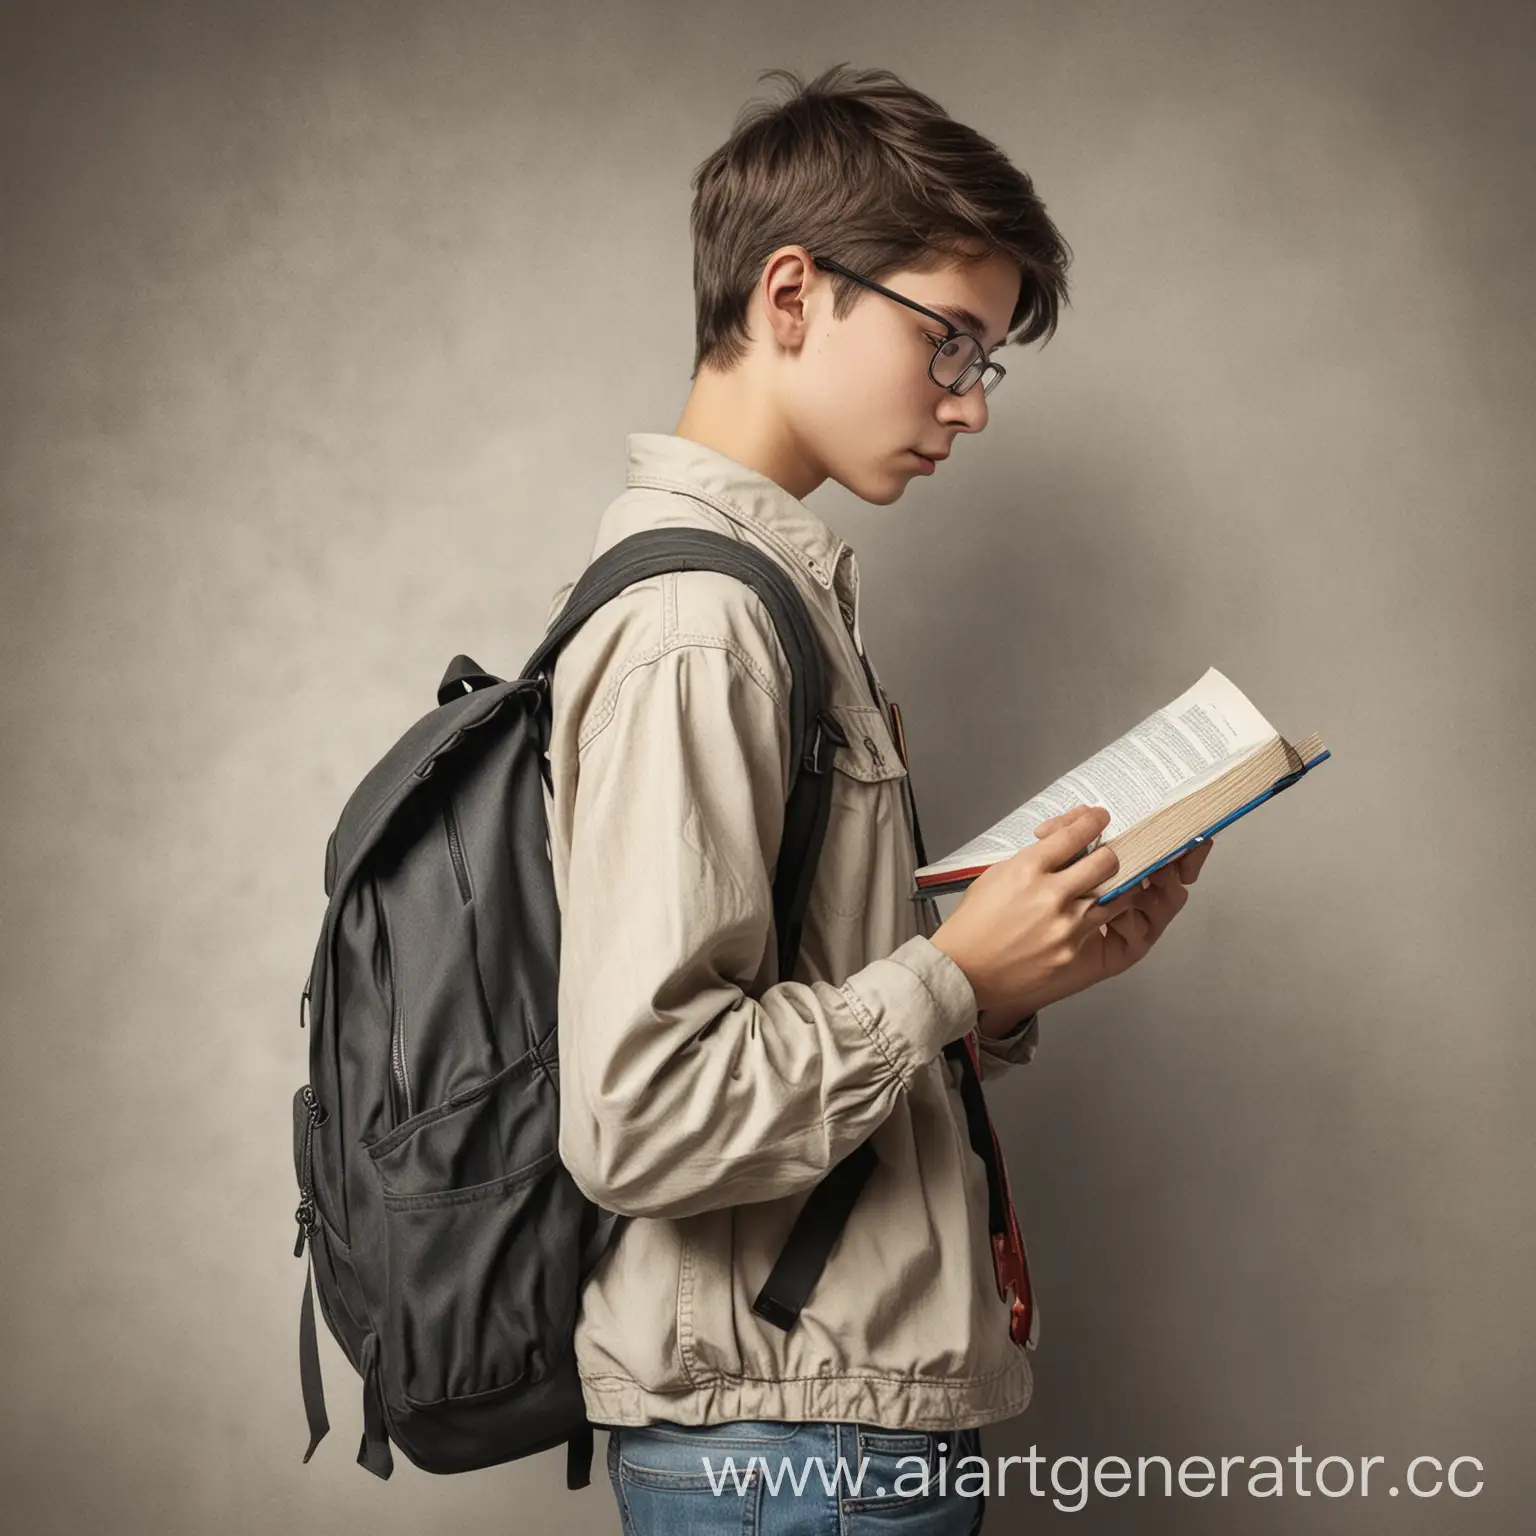 Teenager-Reading-Book-with-Backpack-Sketch